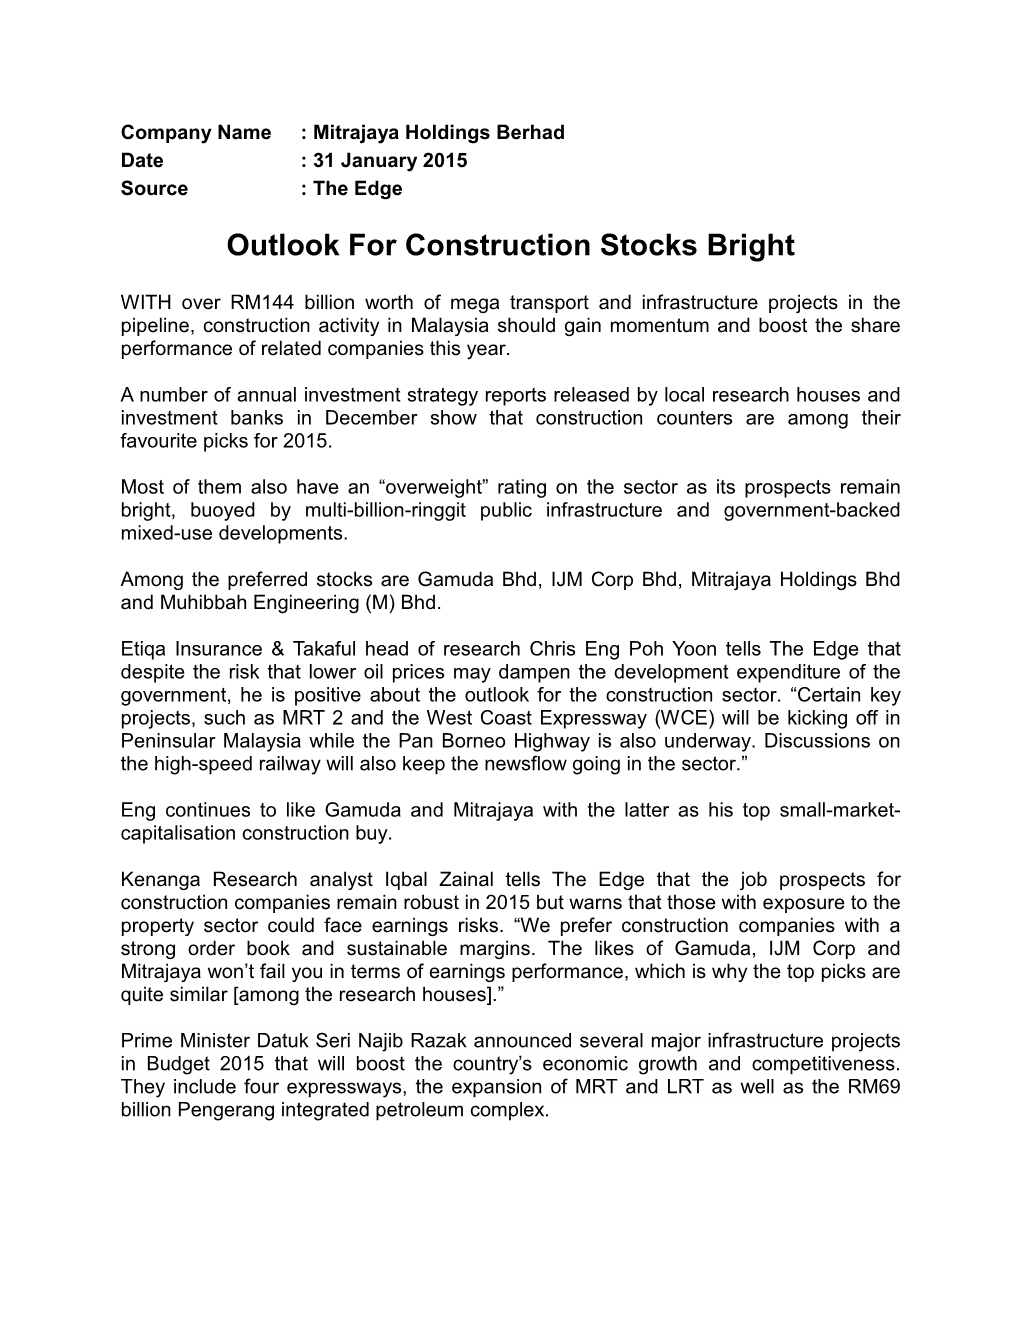 Outlook for Construction Stocks Bright